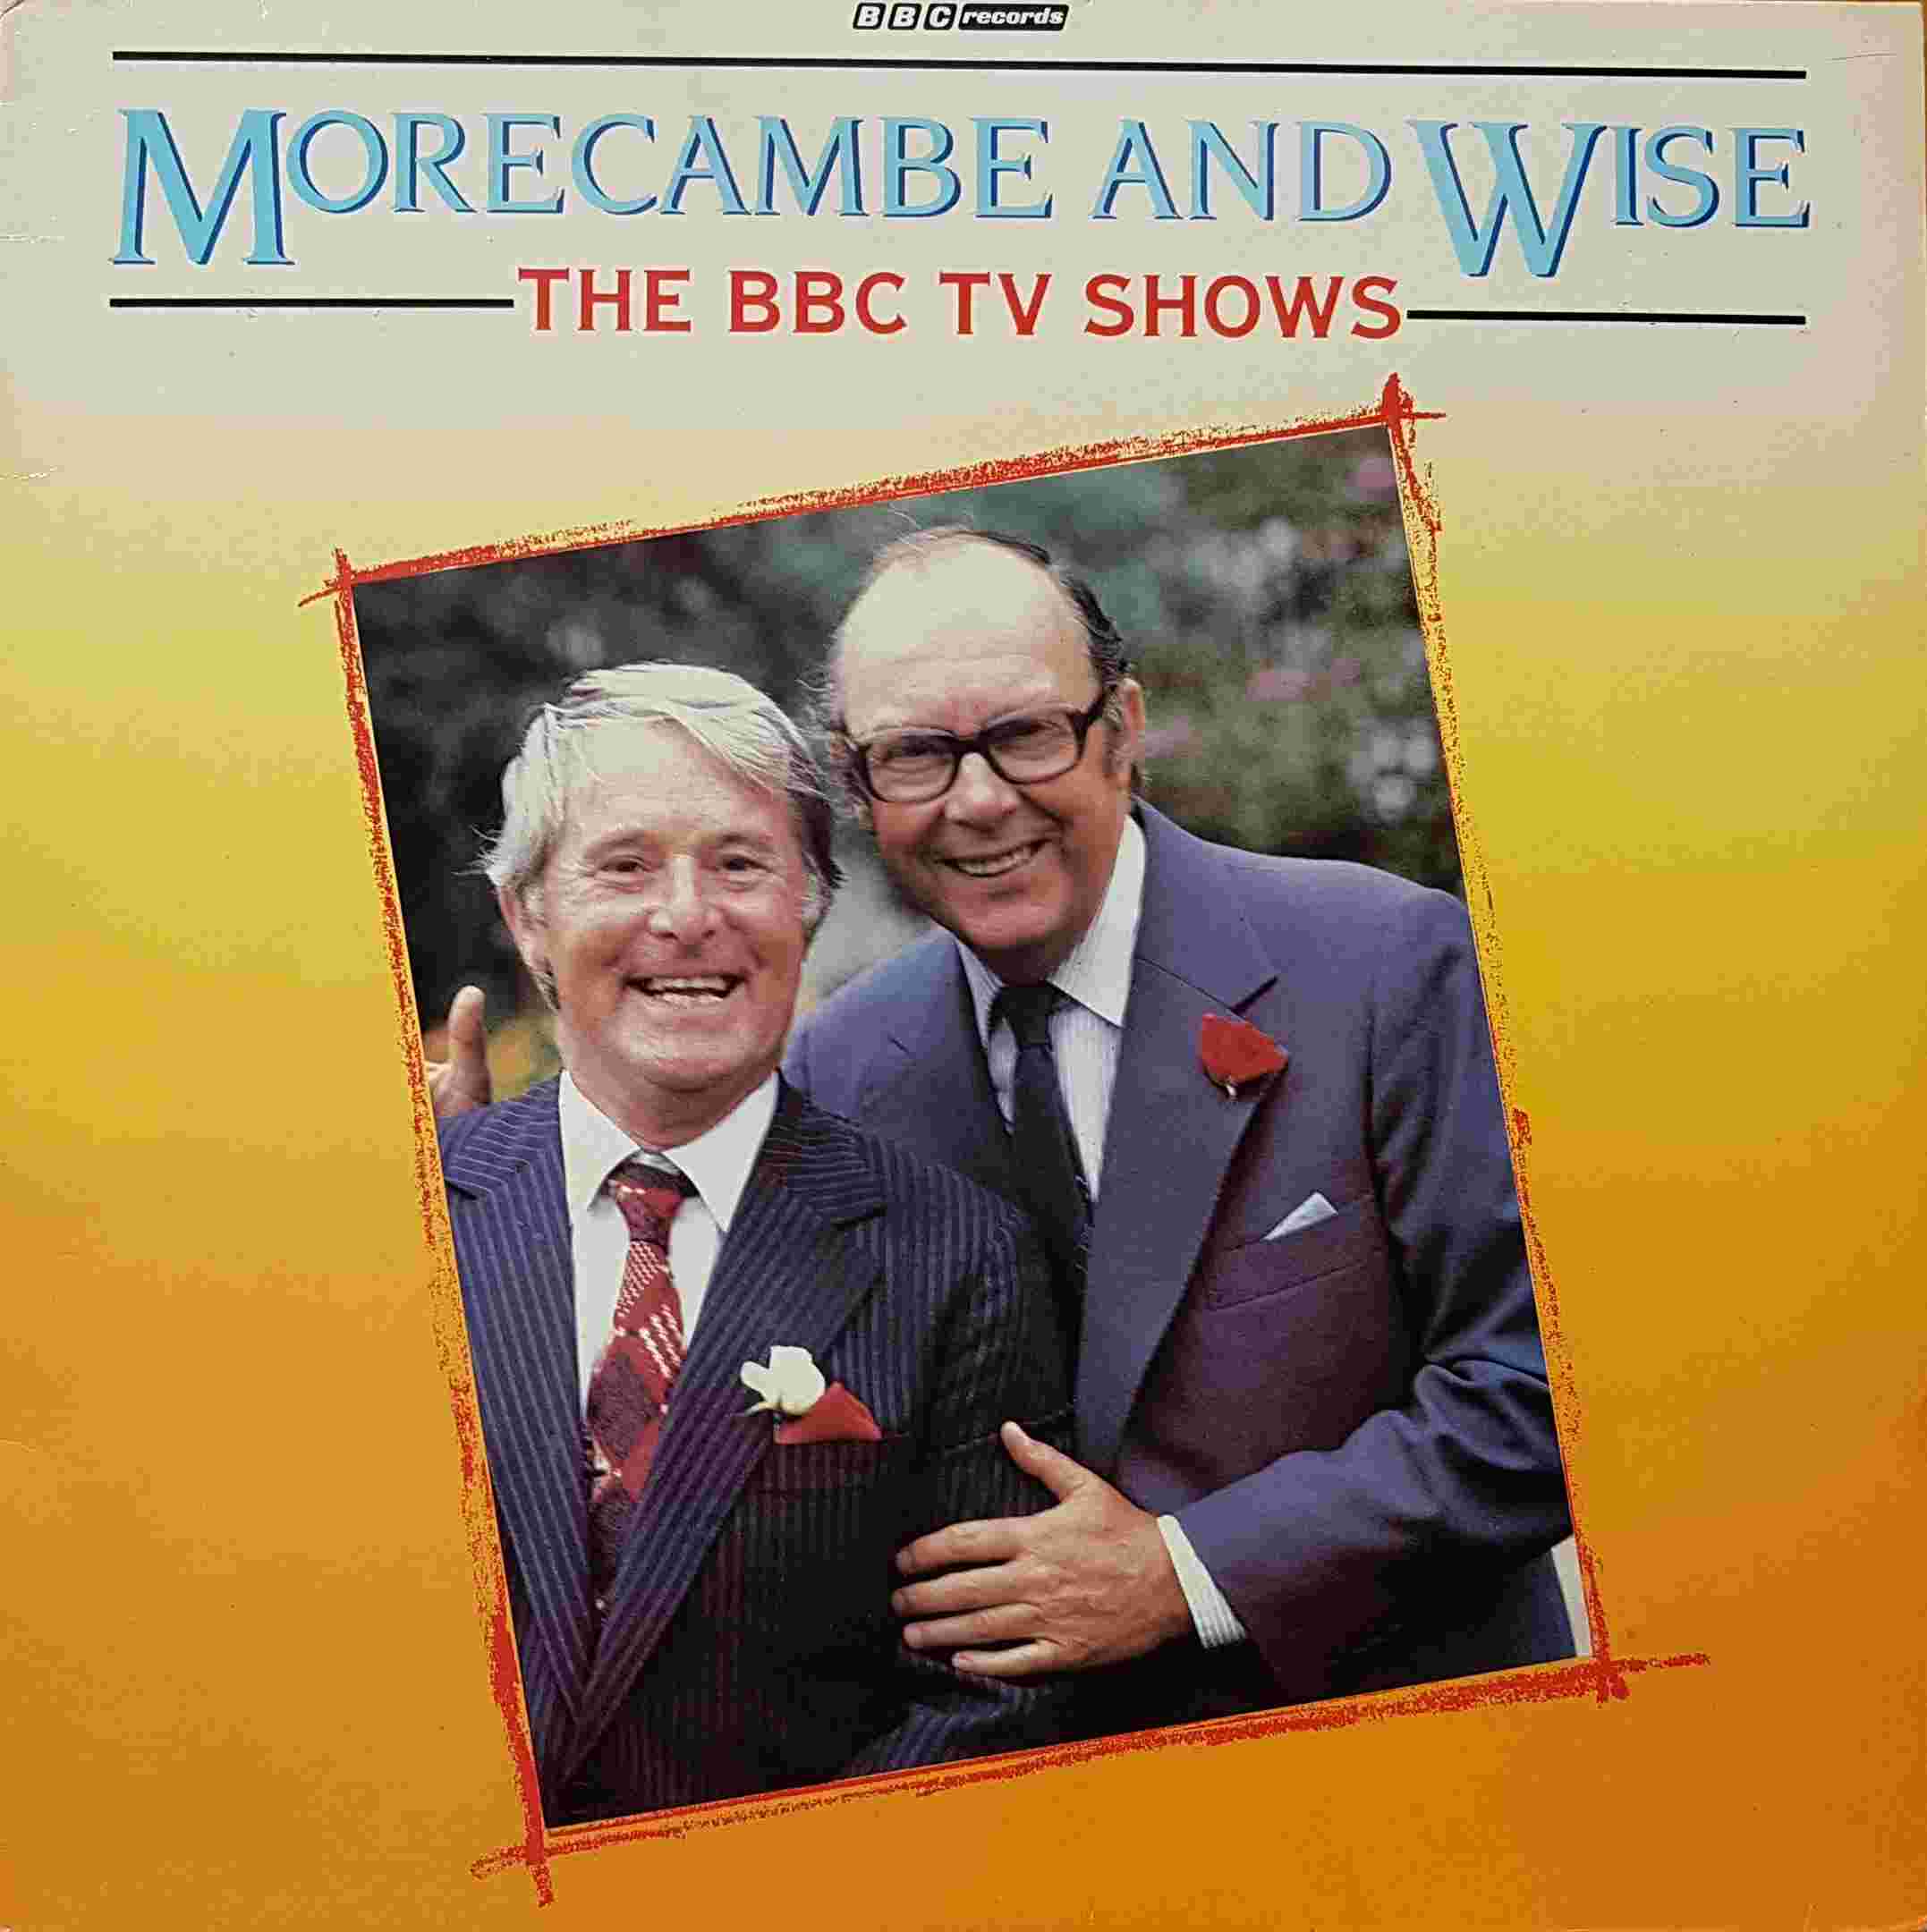 Picture of REC 534 Morecambe and Wise - The TV shows by artist Morecambe / Wise from the BBC records and Tapes library